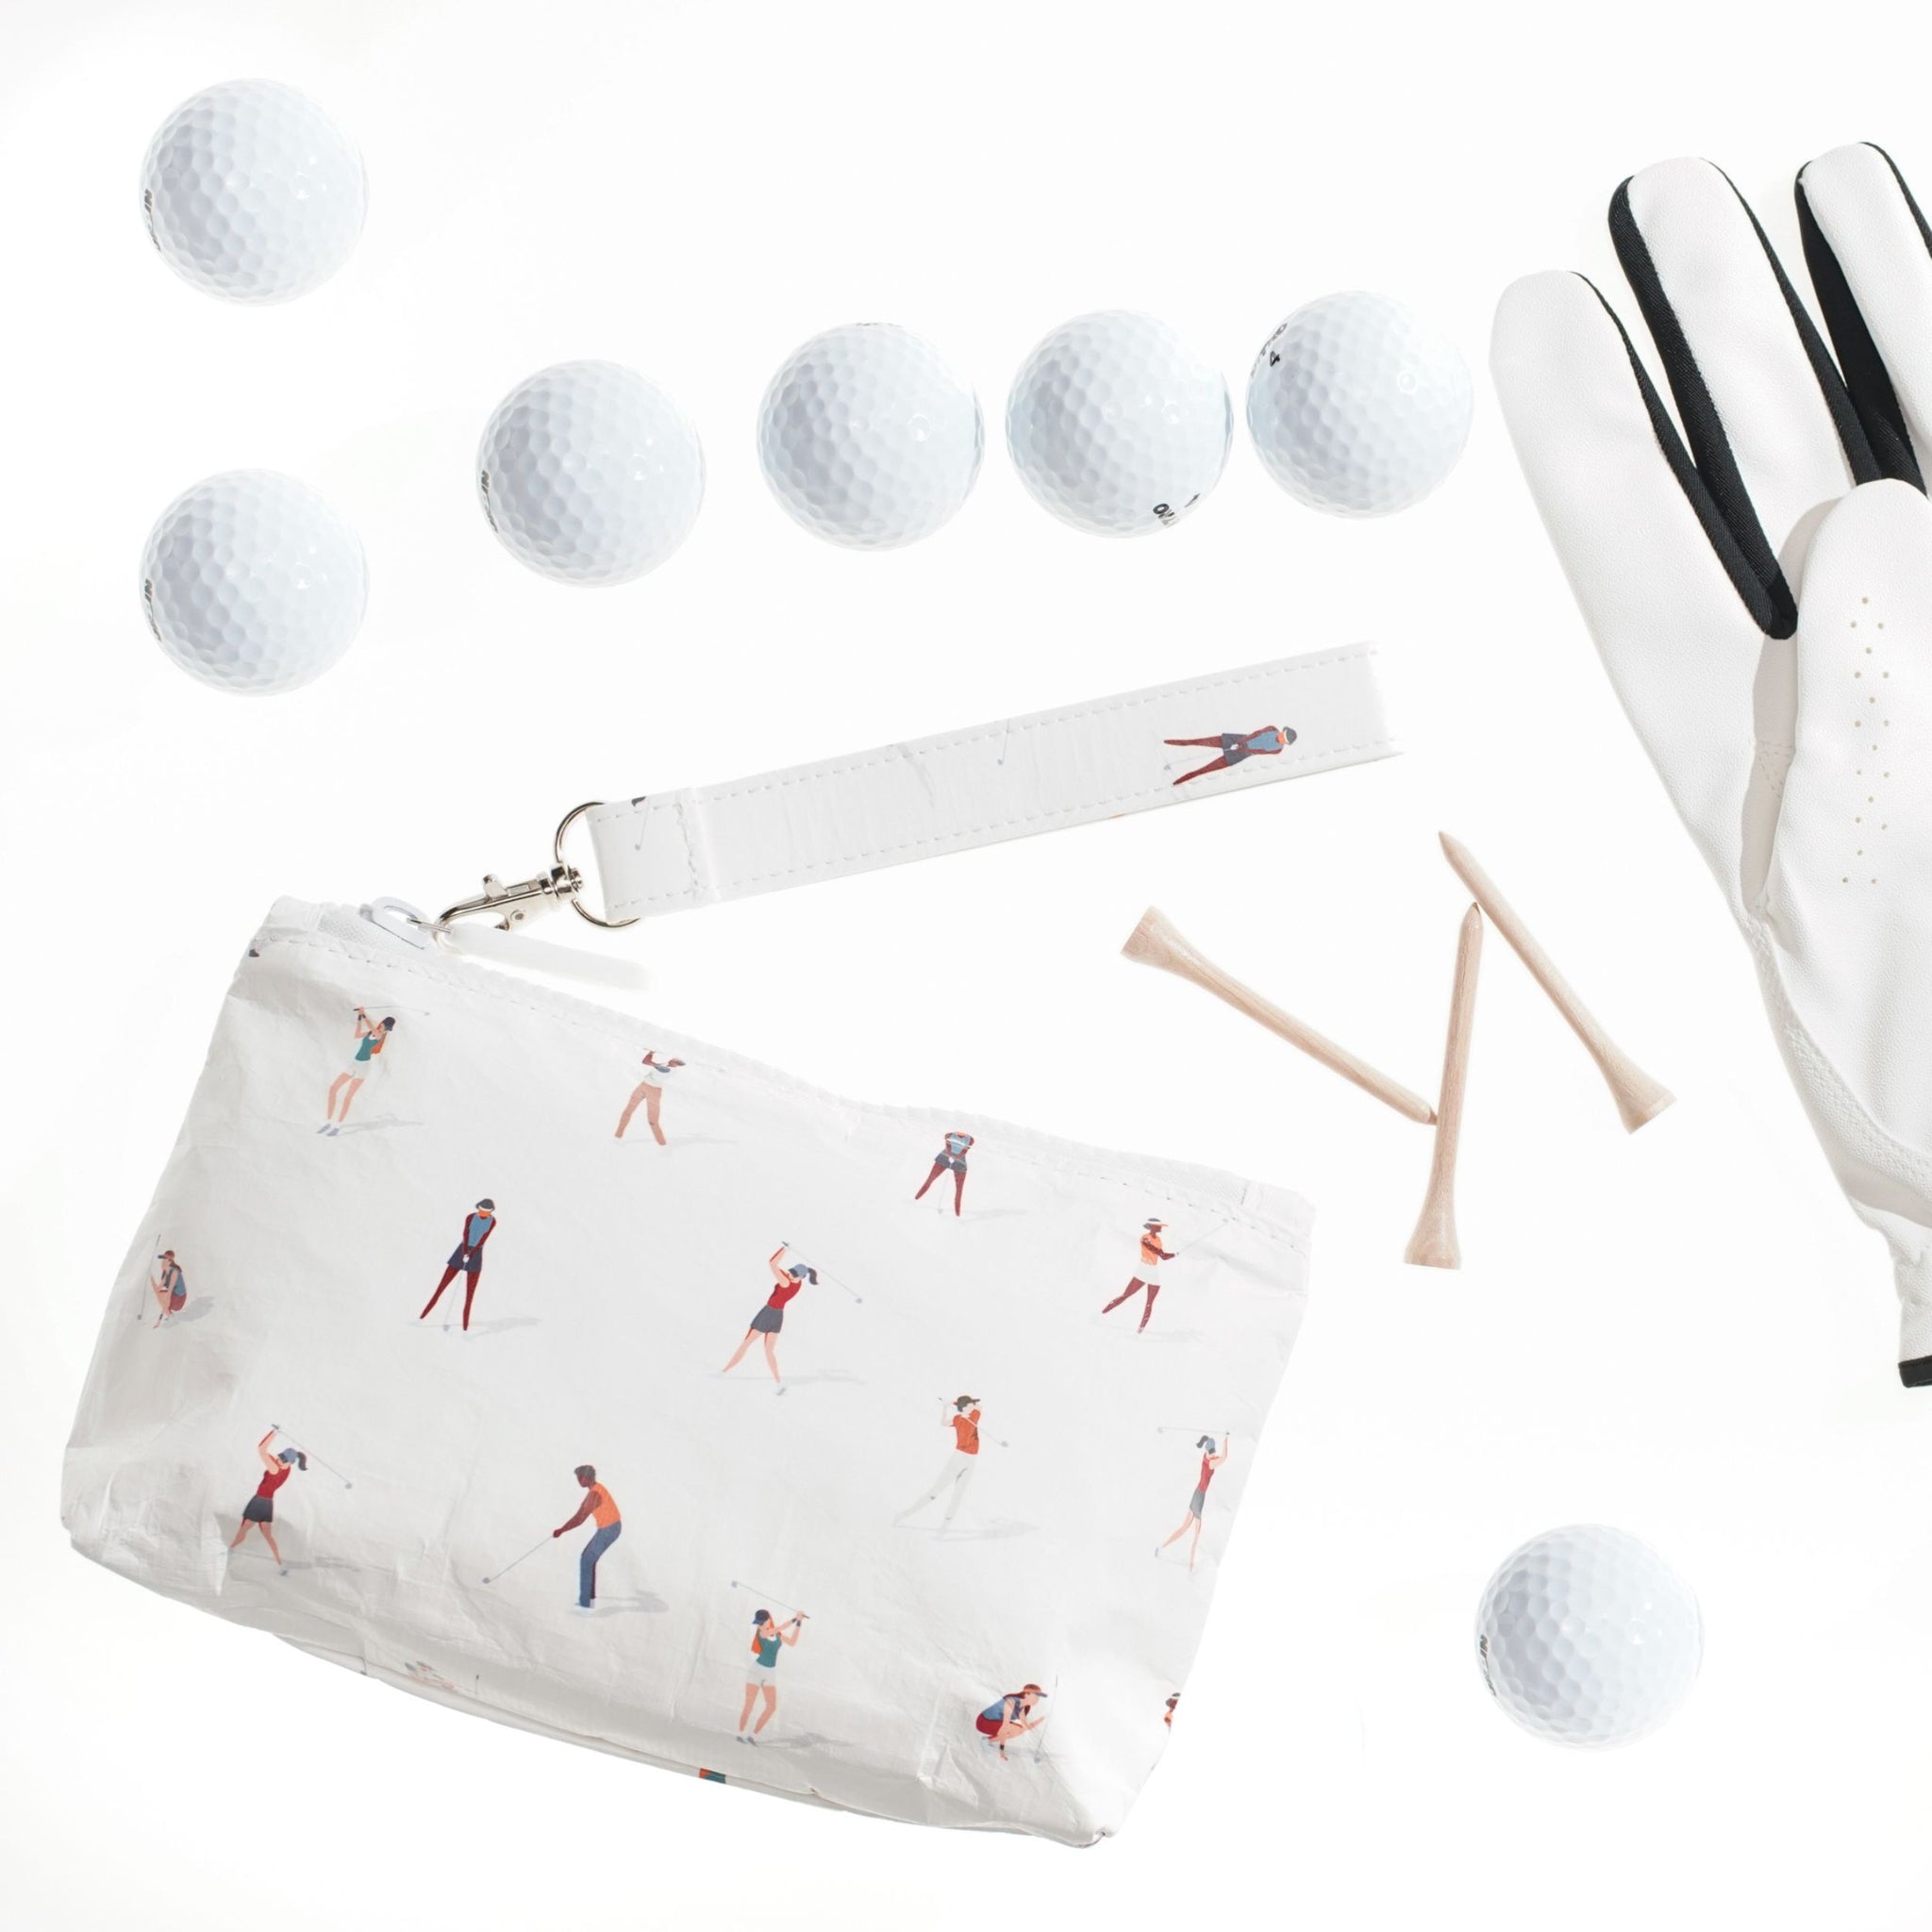 organize your golf bag with zipper pouch